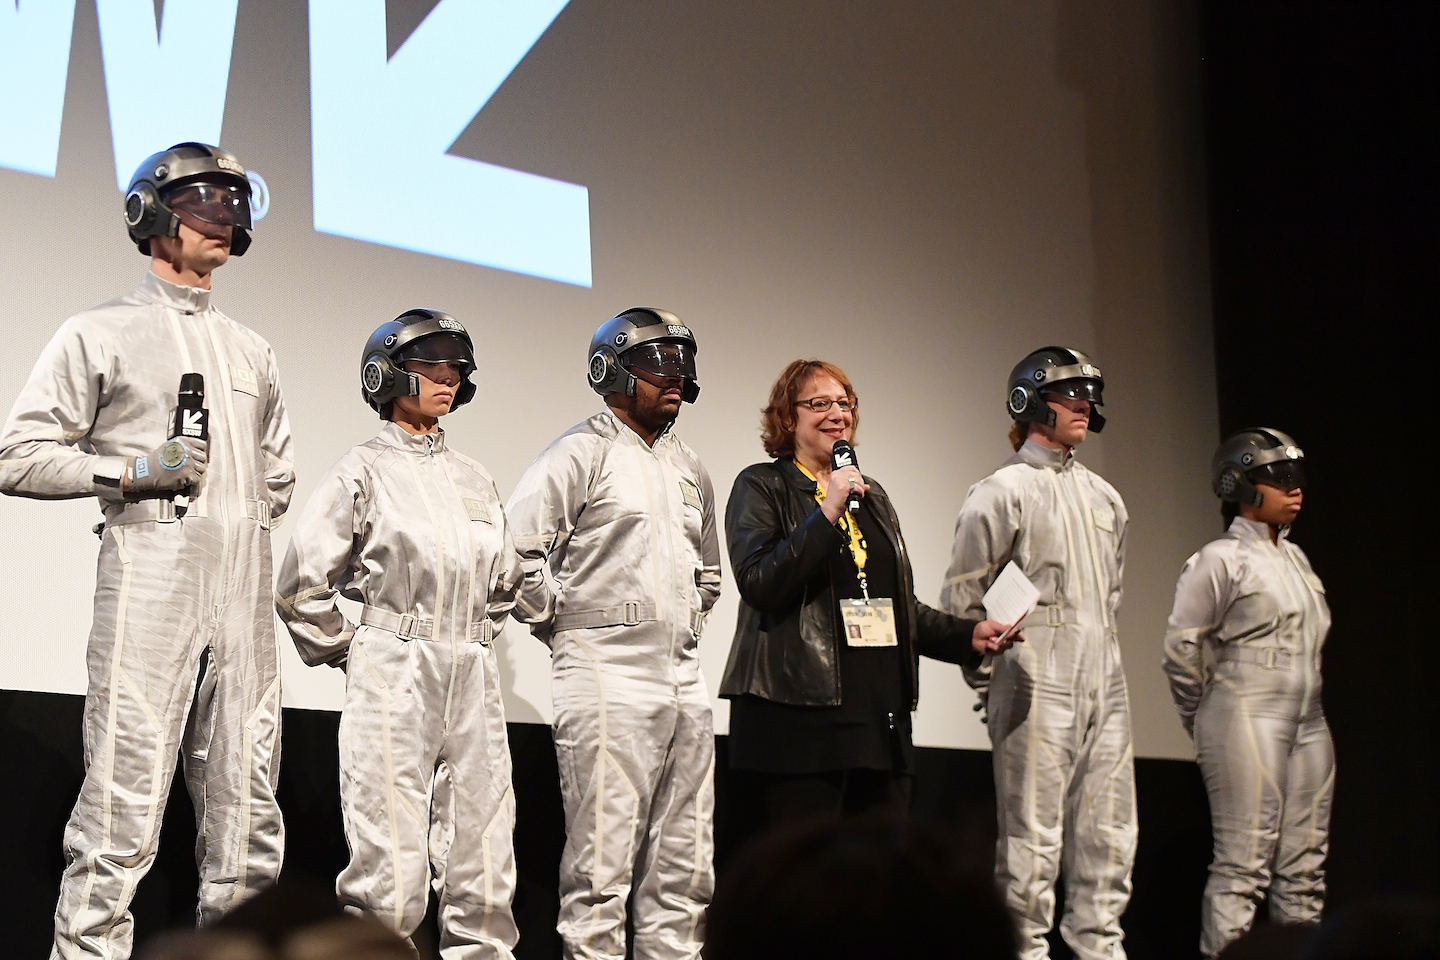 SXSW Film Festival Director Janet Pierson at the Ready Player One World Premiere. Photo by Matt Winkelmeyer/Getty Images for SXSW